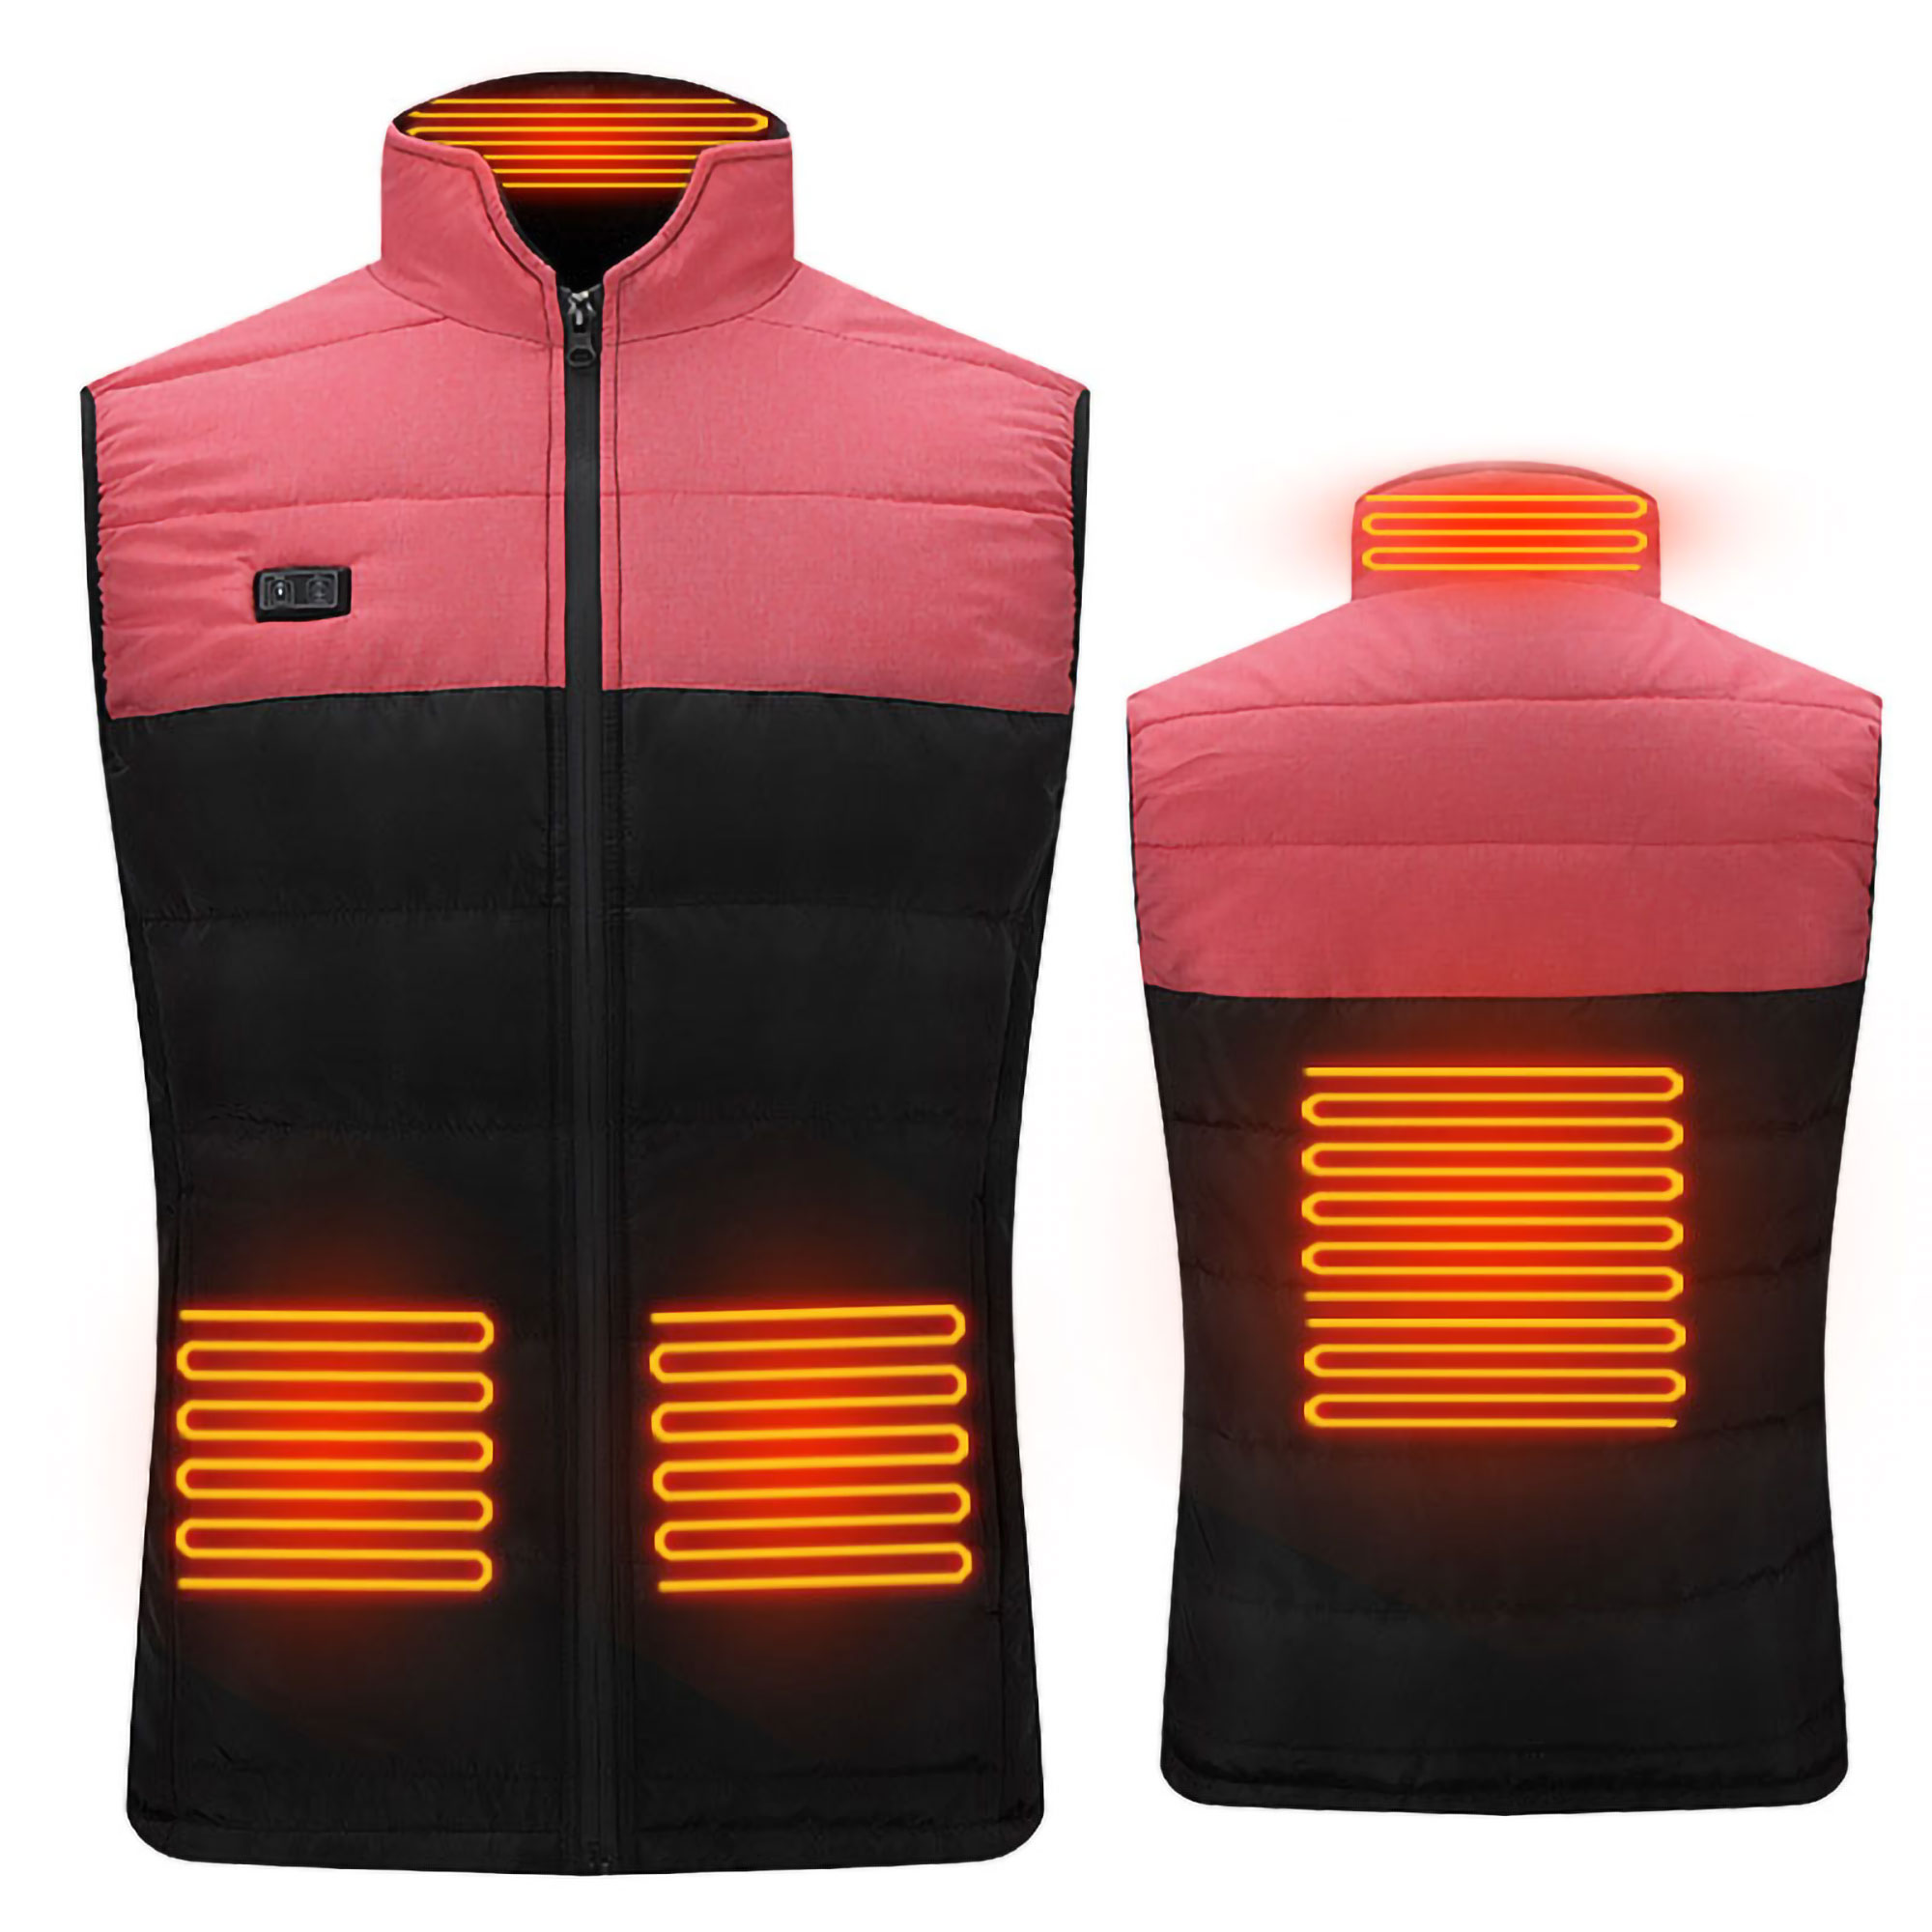 CVLIFE Lightweight Men Heated Vest,9 Heating Zones Electric Vest,3 Heating Levels Heating Vest,Sleeveless Heated Jacket Coat,Outdoor Thermal Heating Outwear Clothing With 10000mHA Power Bank - image 1 of 3